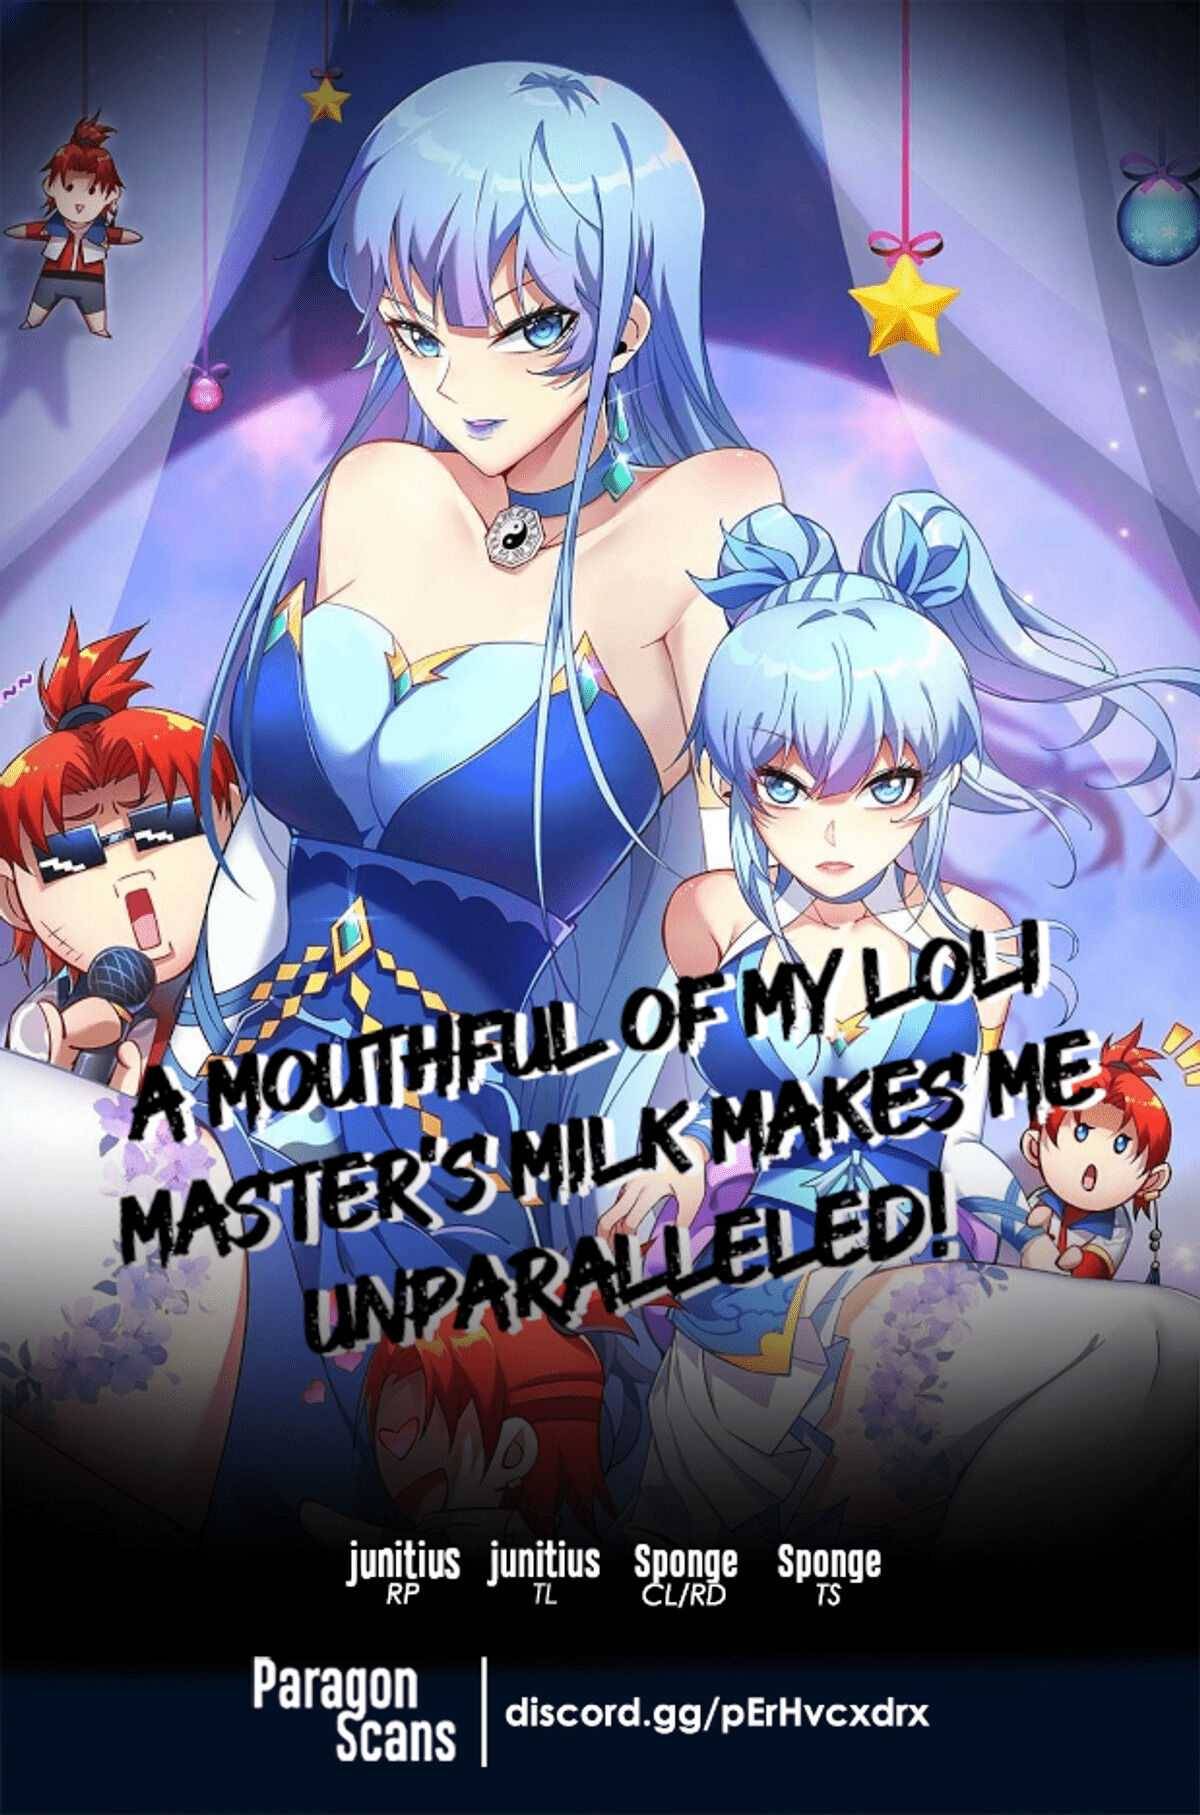 A Mouthful of My L0li Master's Milk Makes Me Unparalleled - chapter 7 - #1